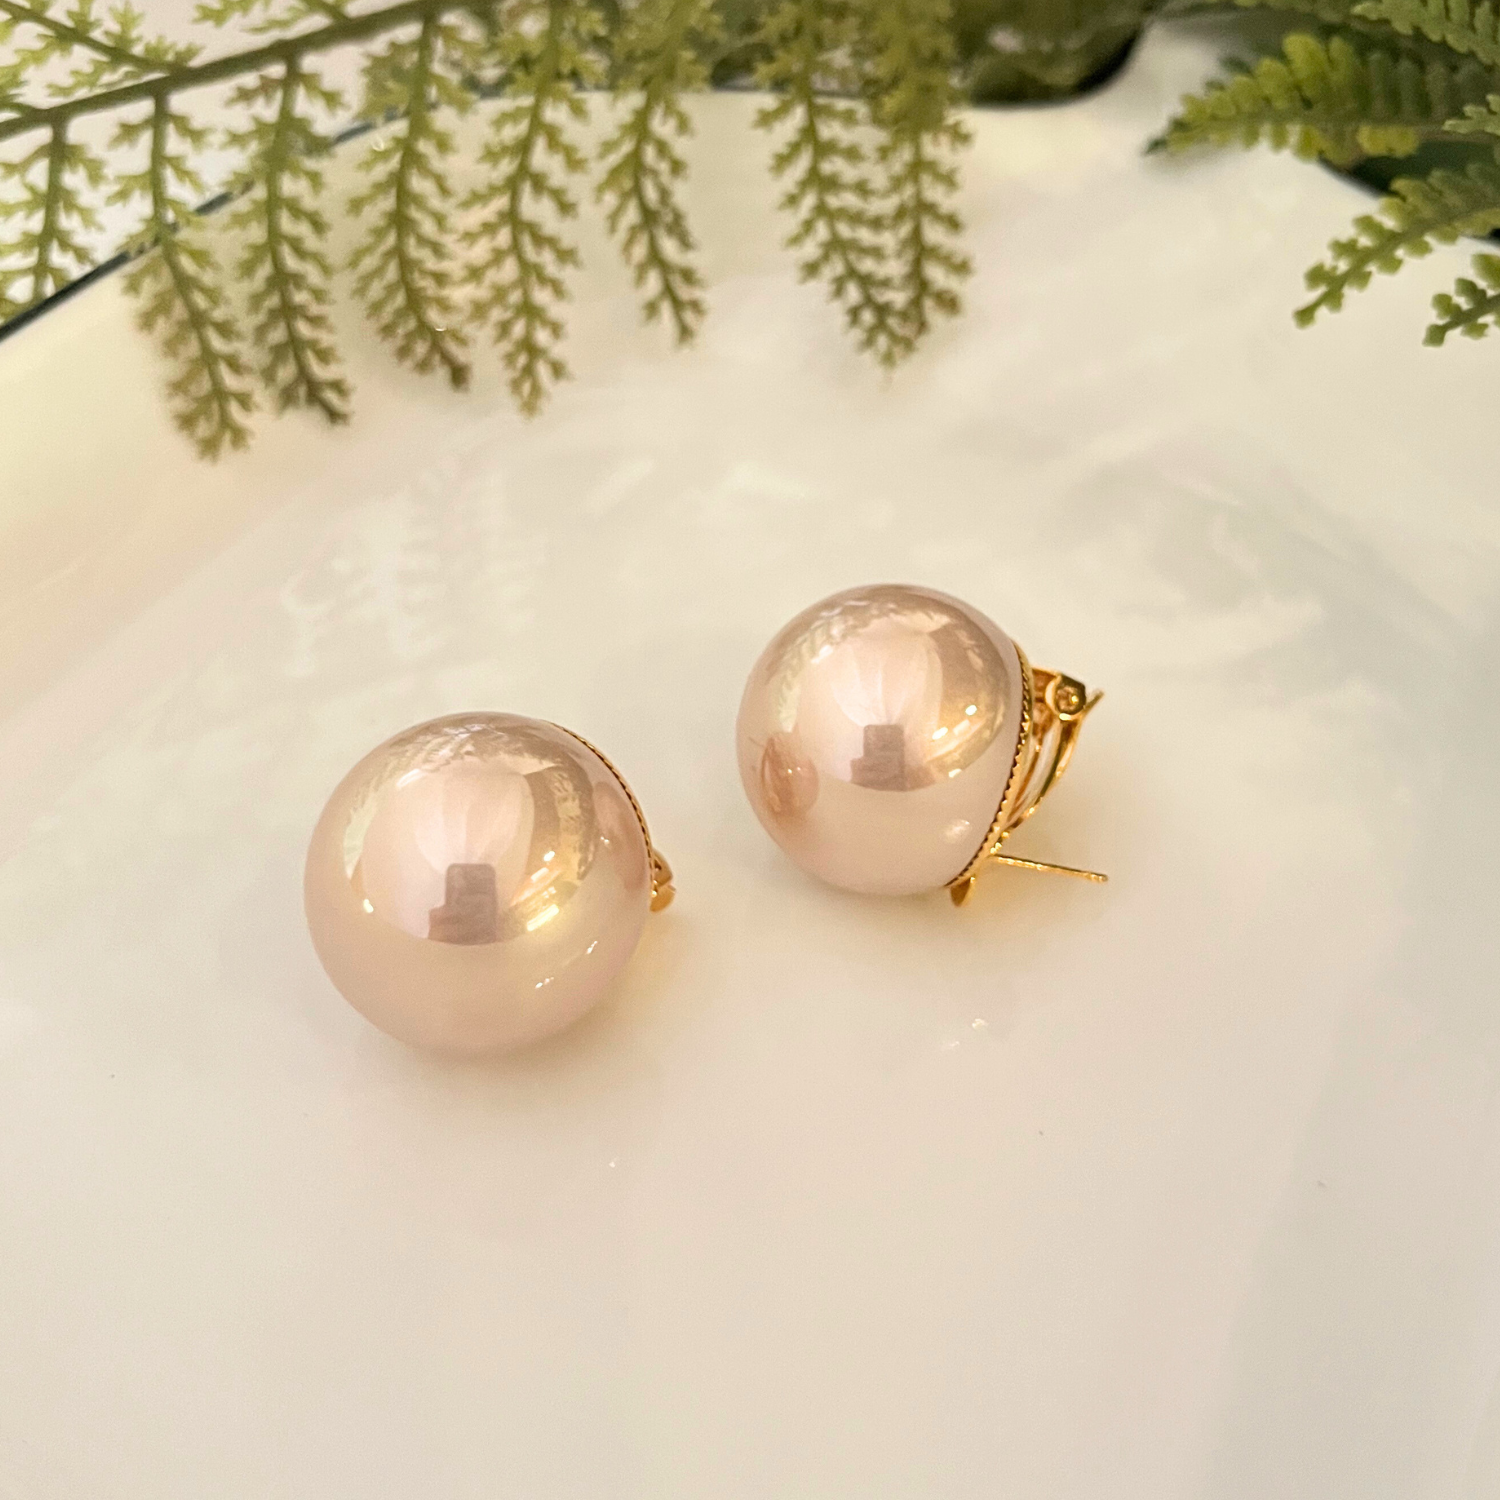 25mm Pearl Studs With Clip- White